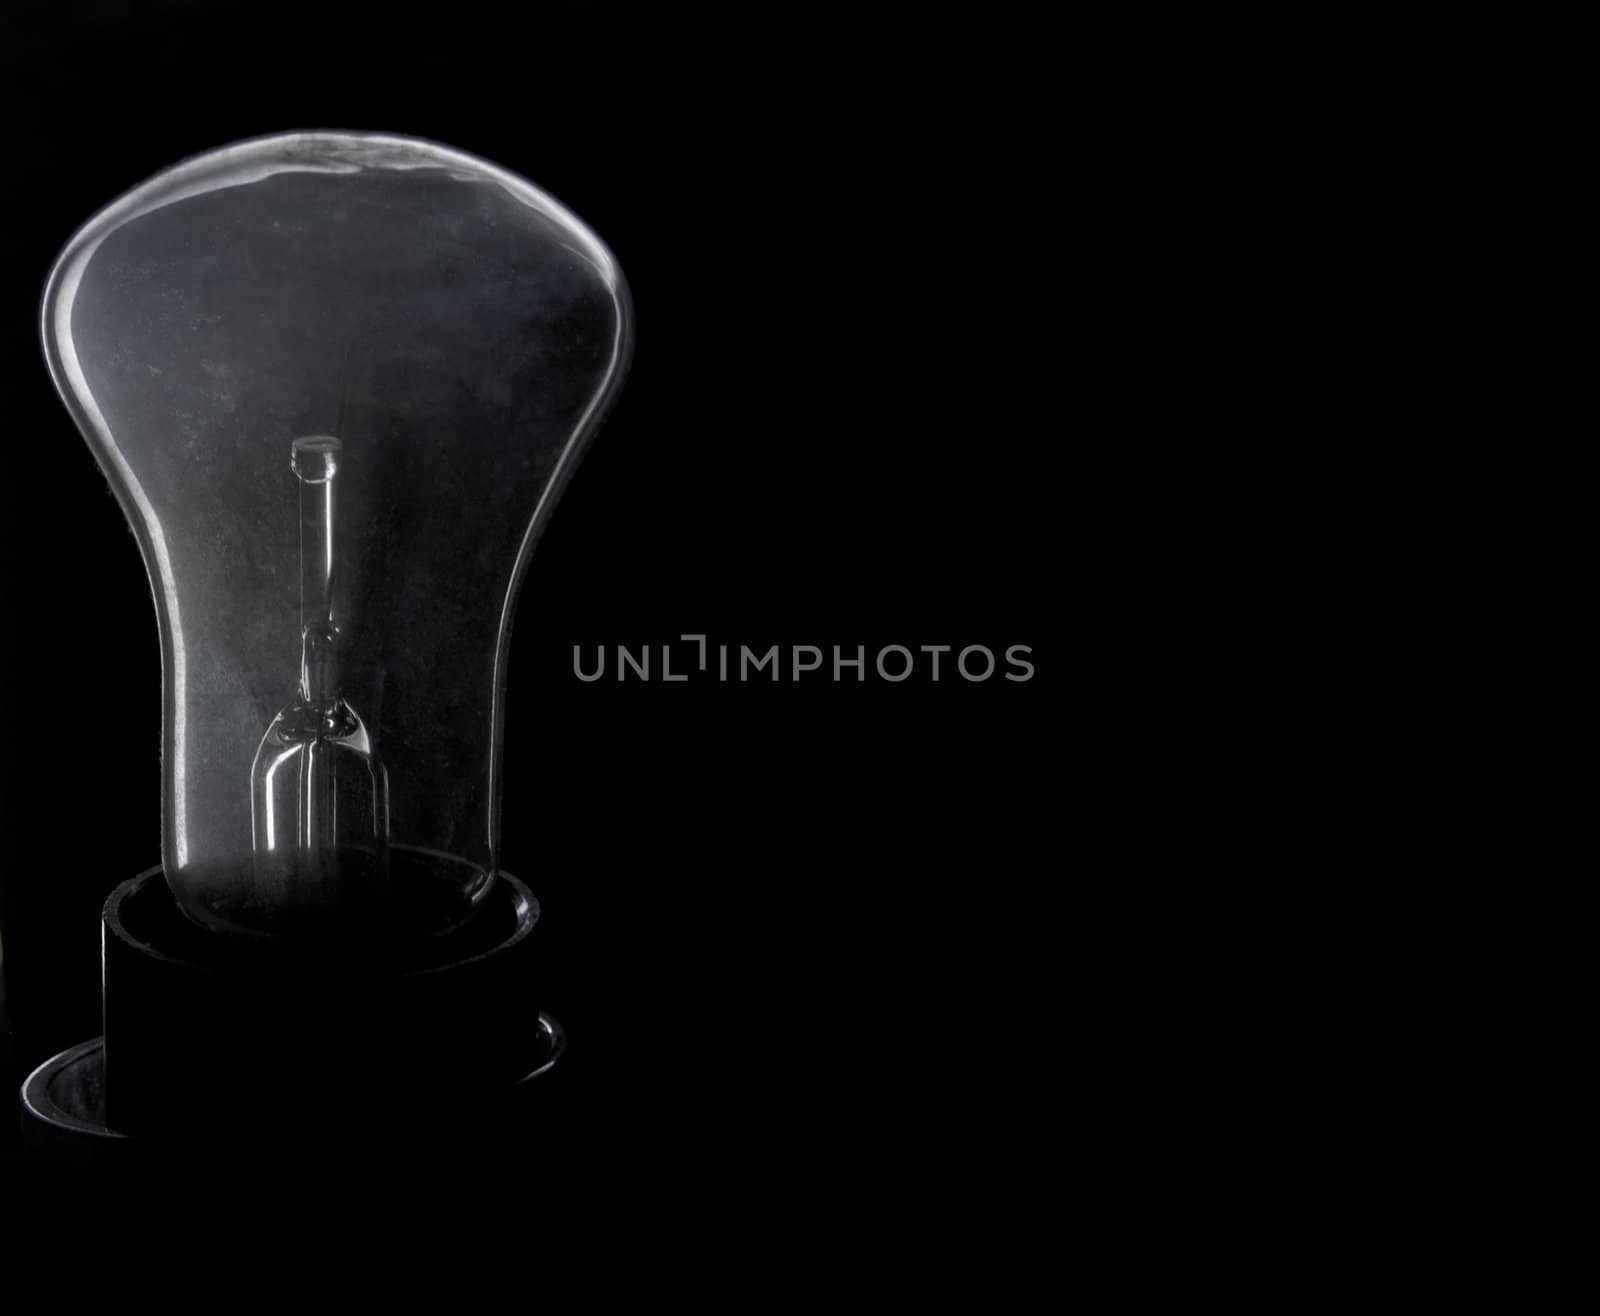 Incandescence bulb on a black background with a poorly transparent flask